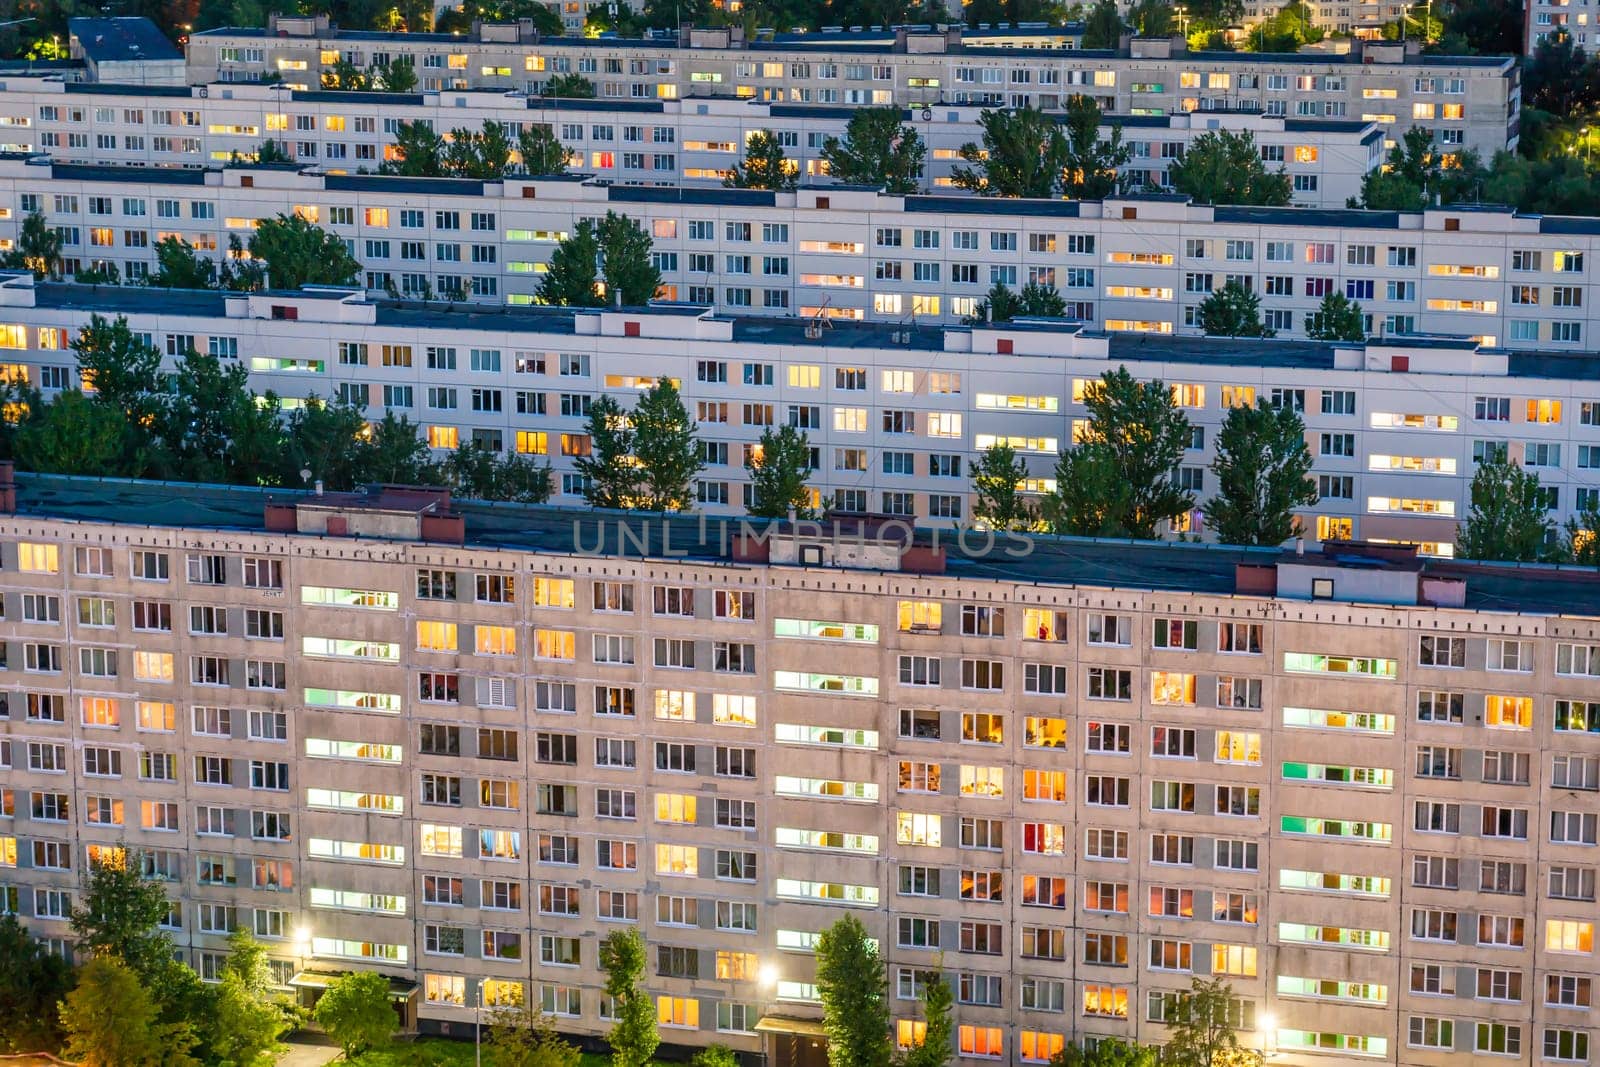 Timelapse of residential quarters of the night city with the lights on from the windows of the apartments. by DovidPro